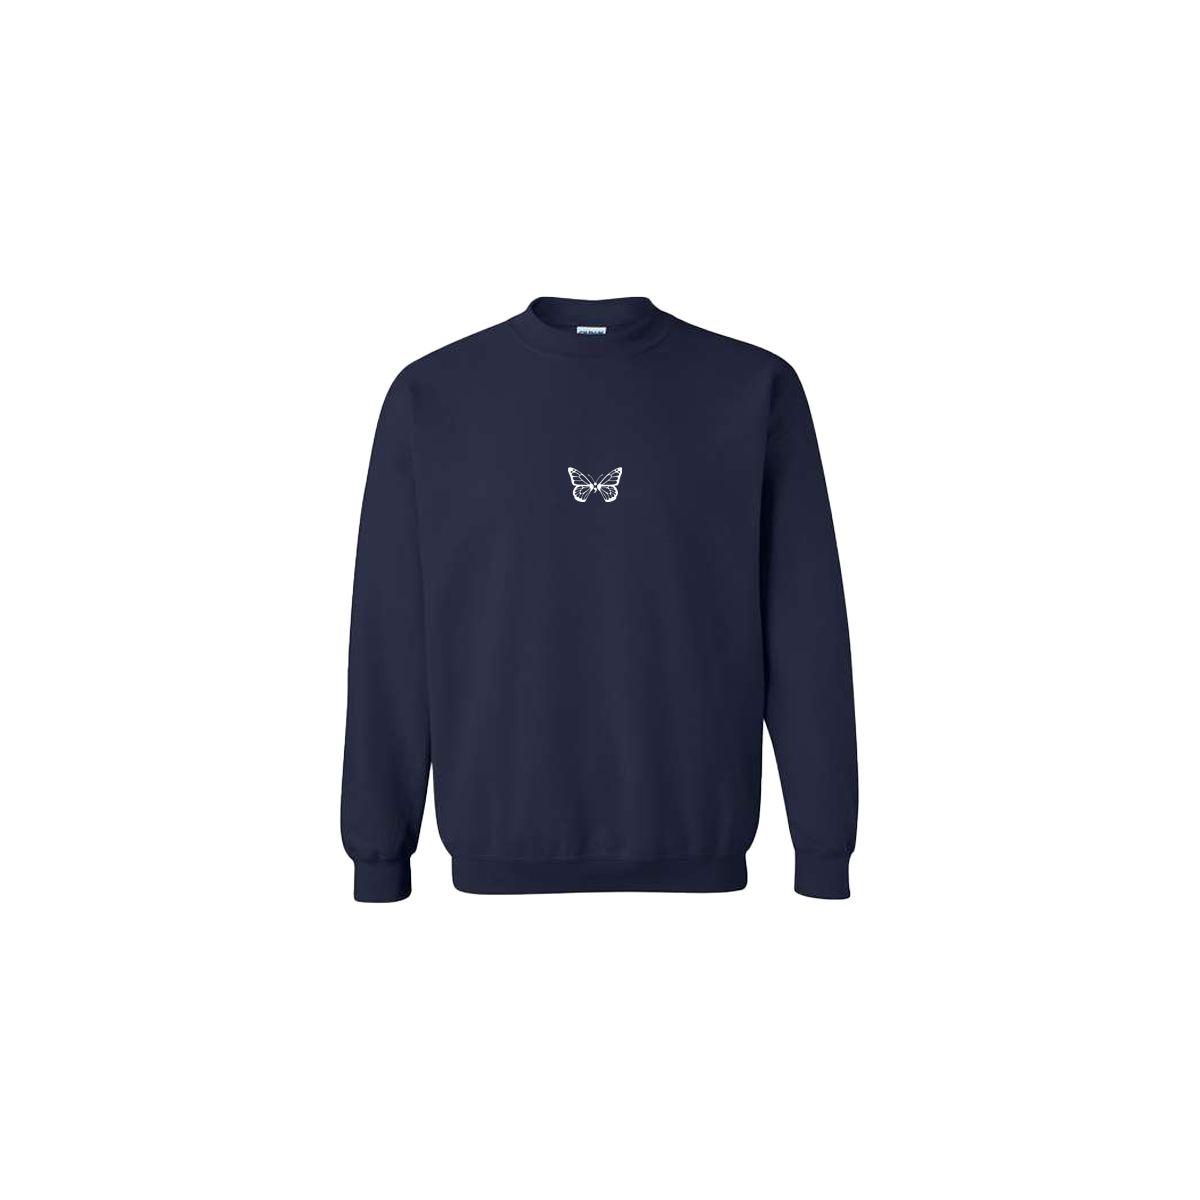 Butterfly Embroidered Navy Blue Crewneck - Mental Health Awareness Clothing